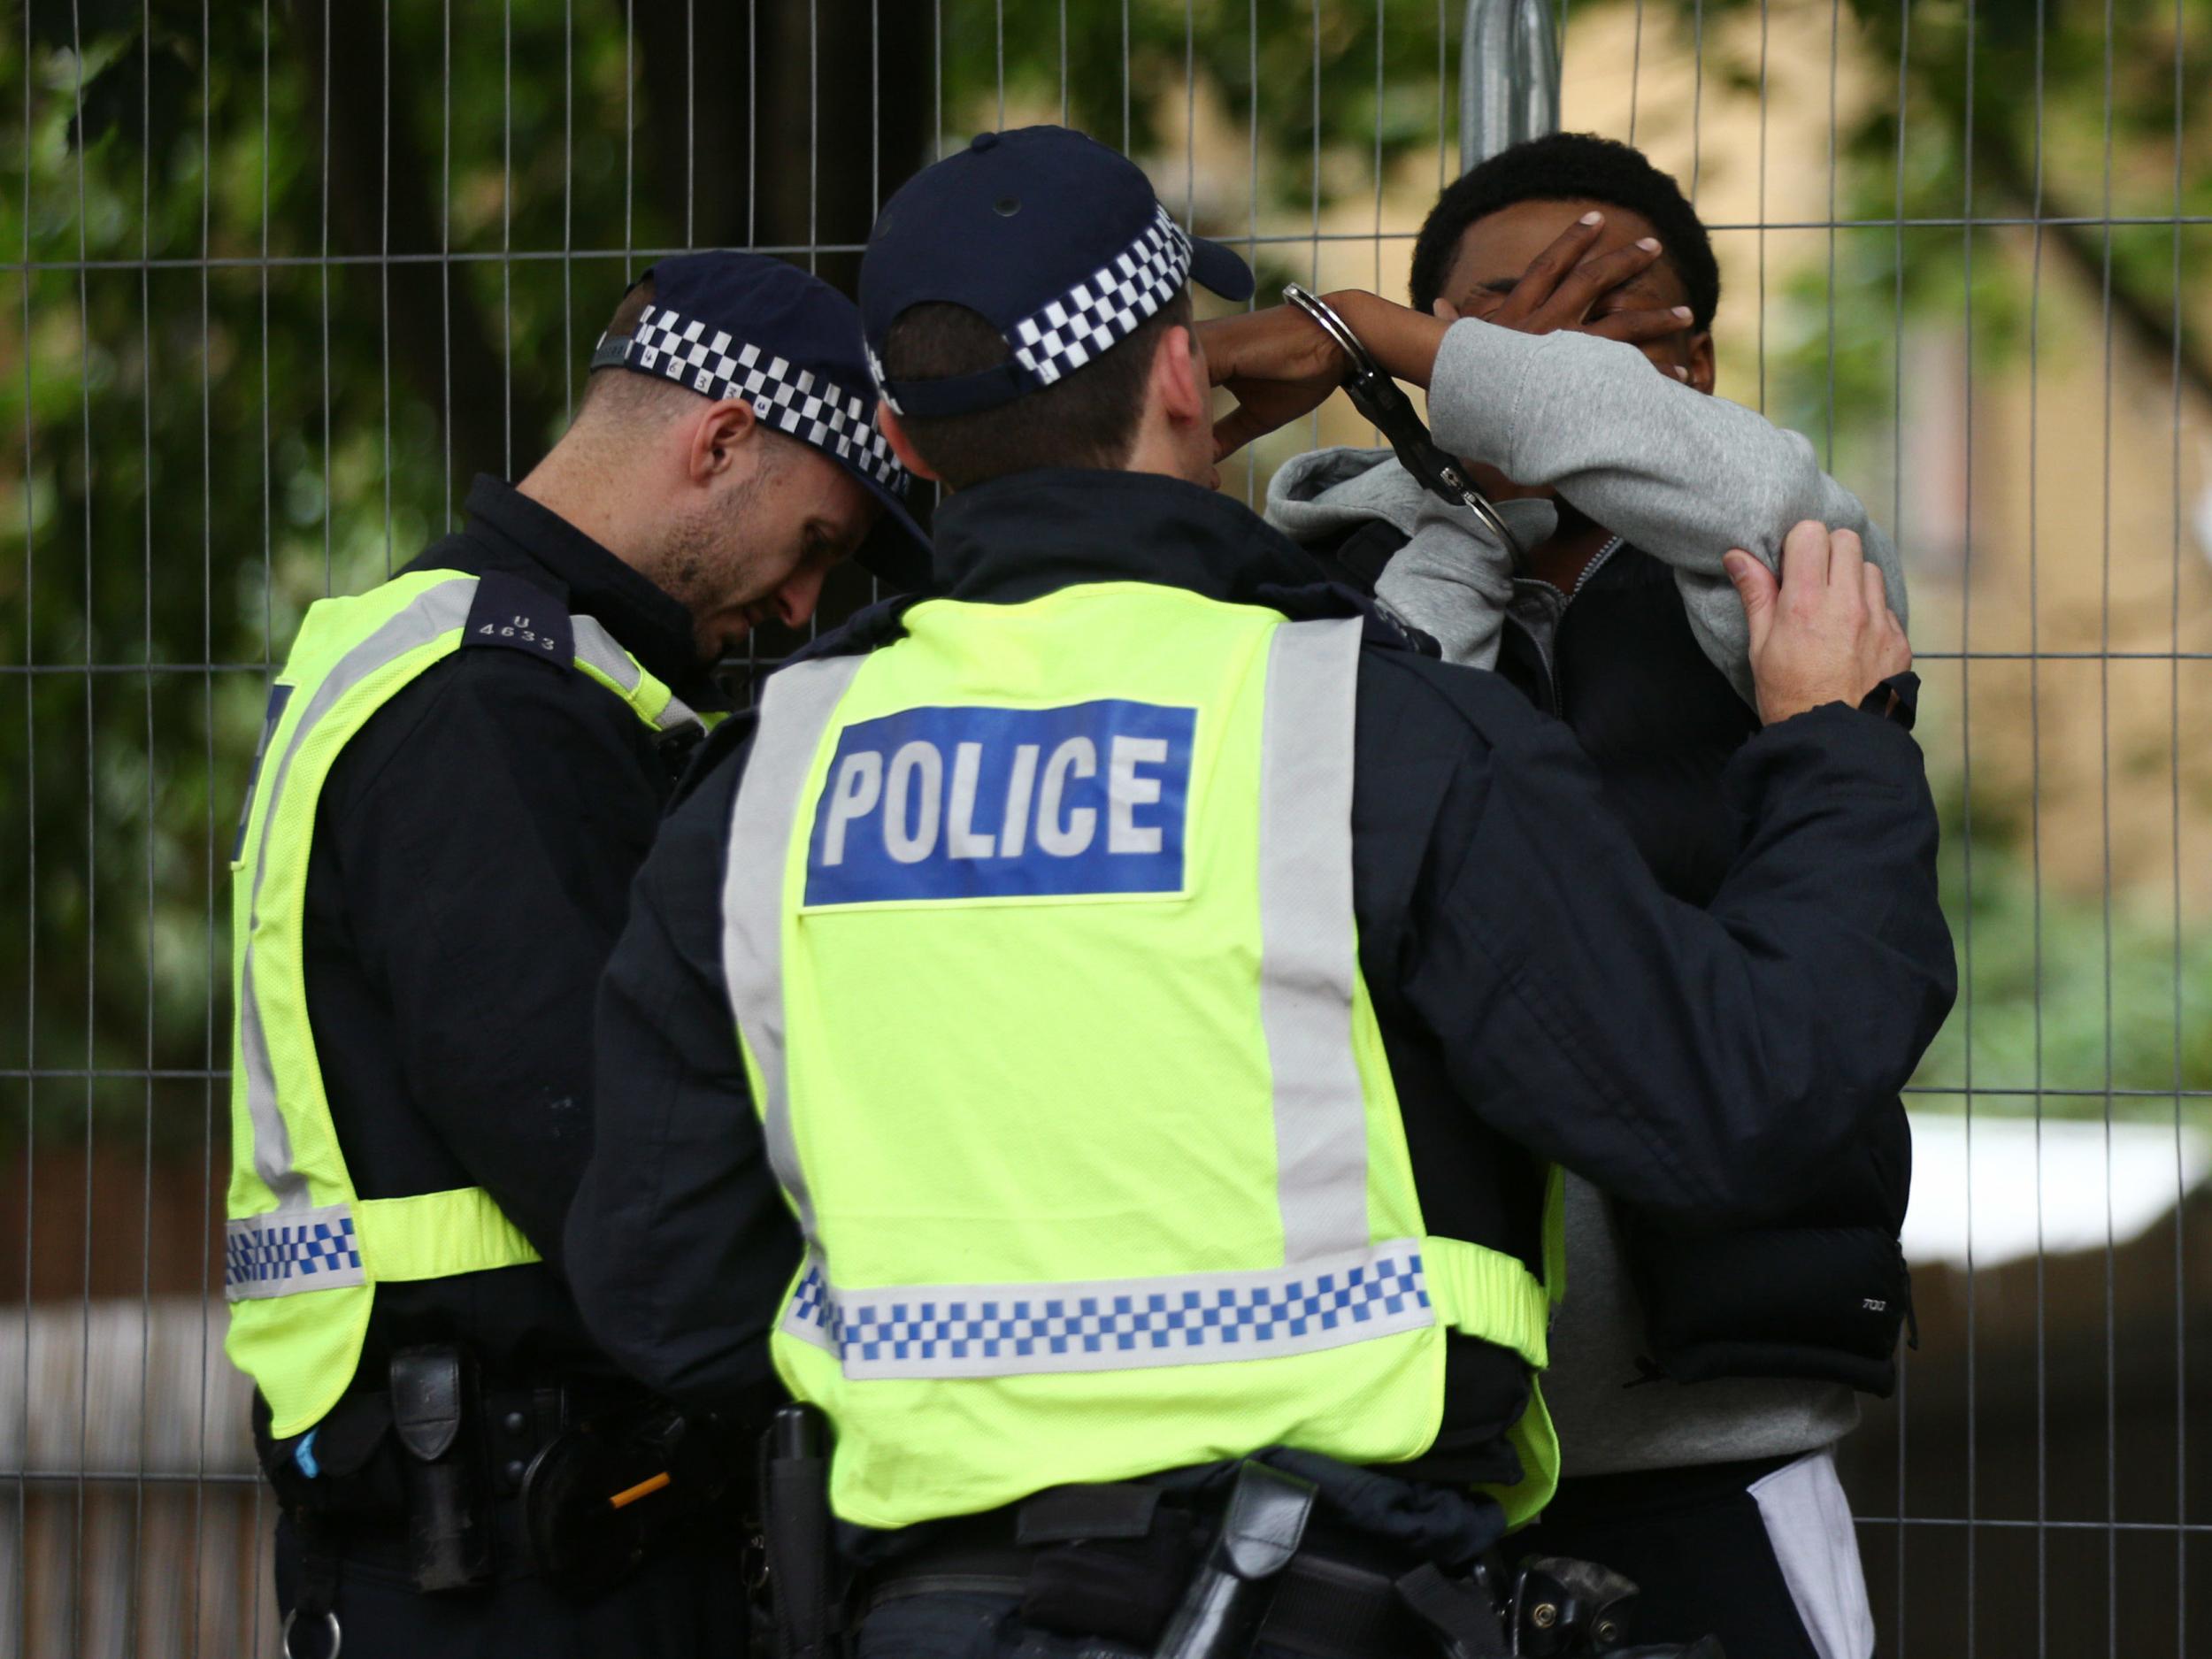 Disproportionate stop and search is one of the issues raised in Black Lives Matter demonstrations